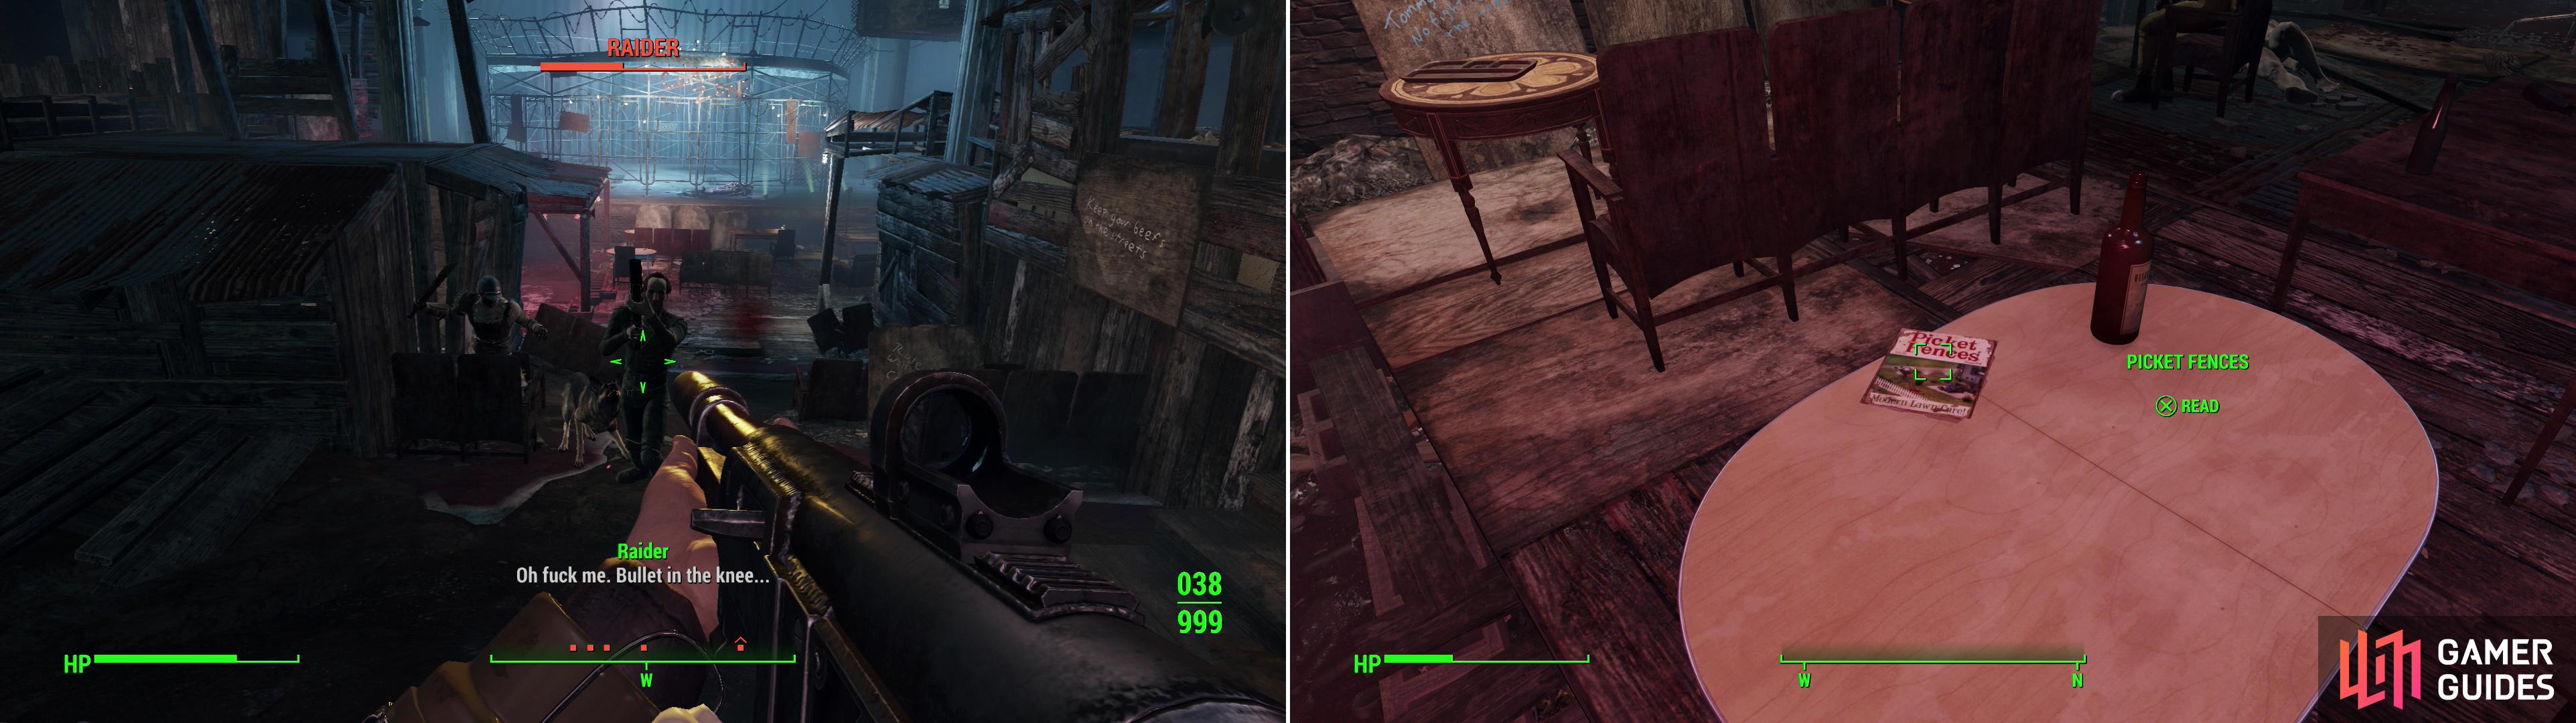 Kill the Raiders inside the Combat Zone and make the area live up to its name (left) then search around for an issue of Picket Fences (right).